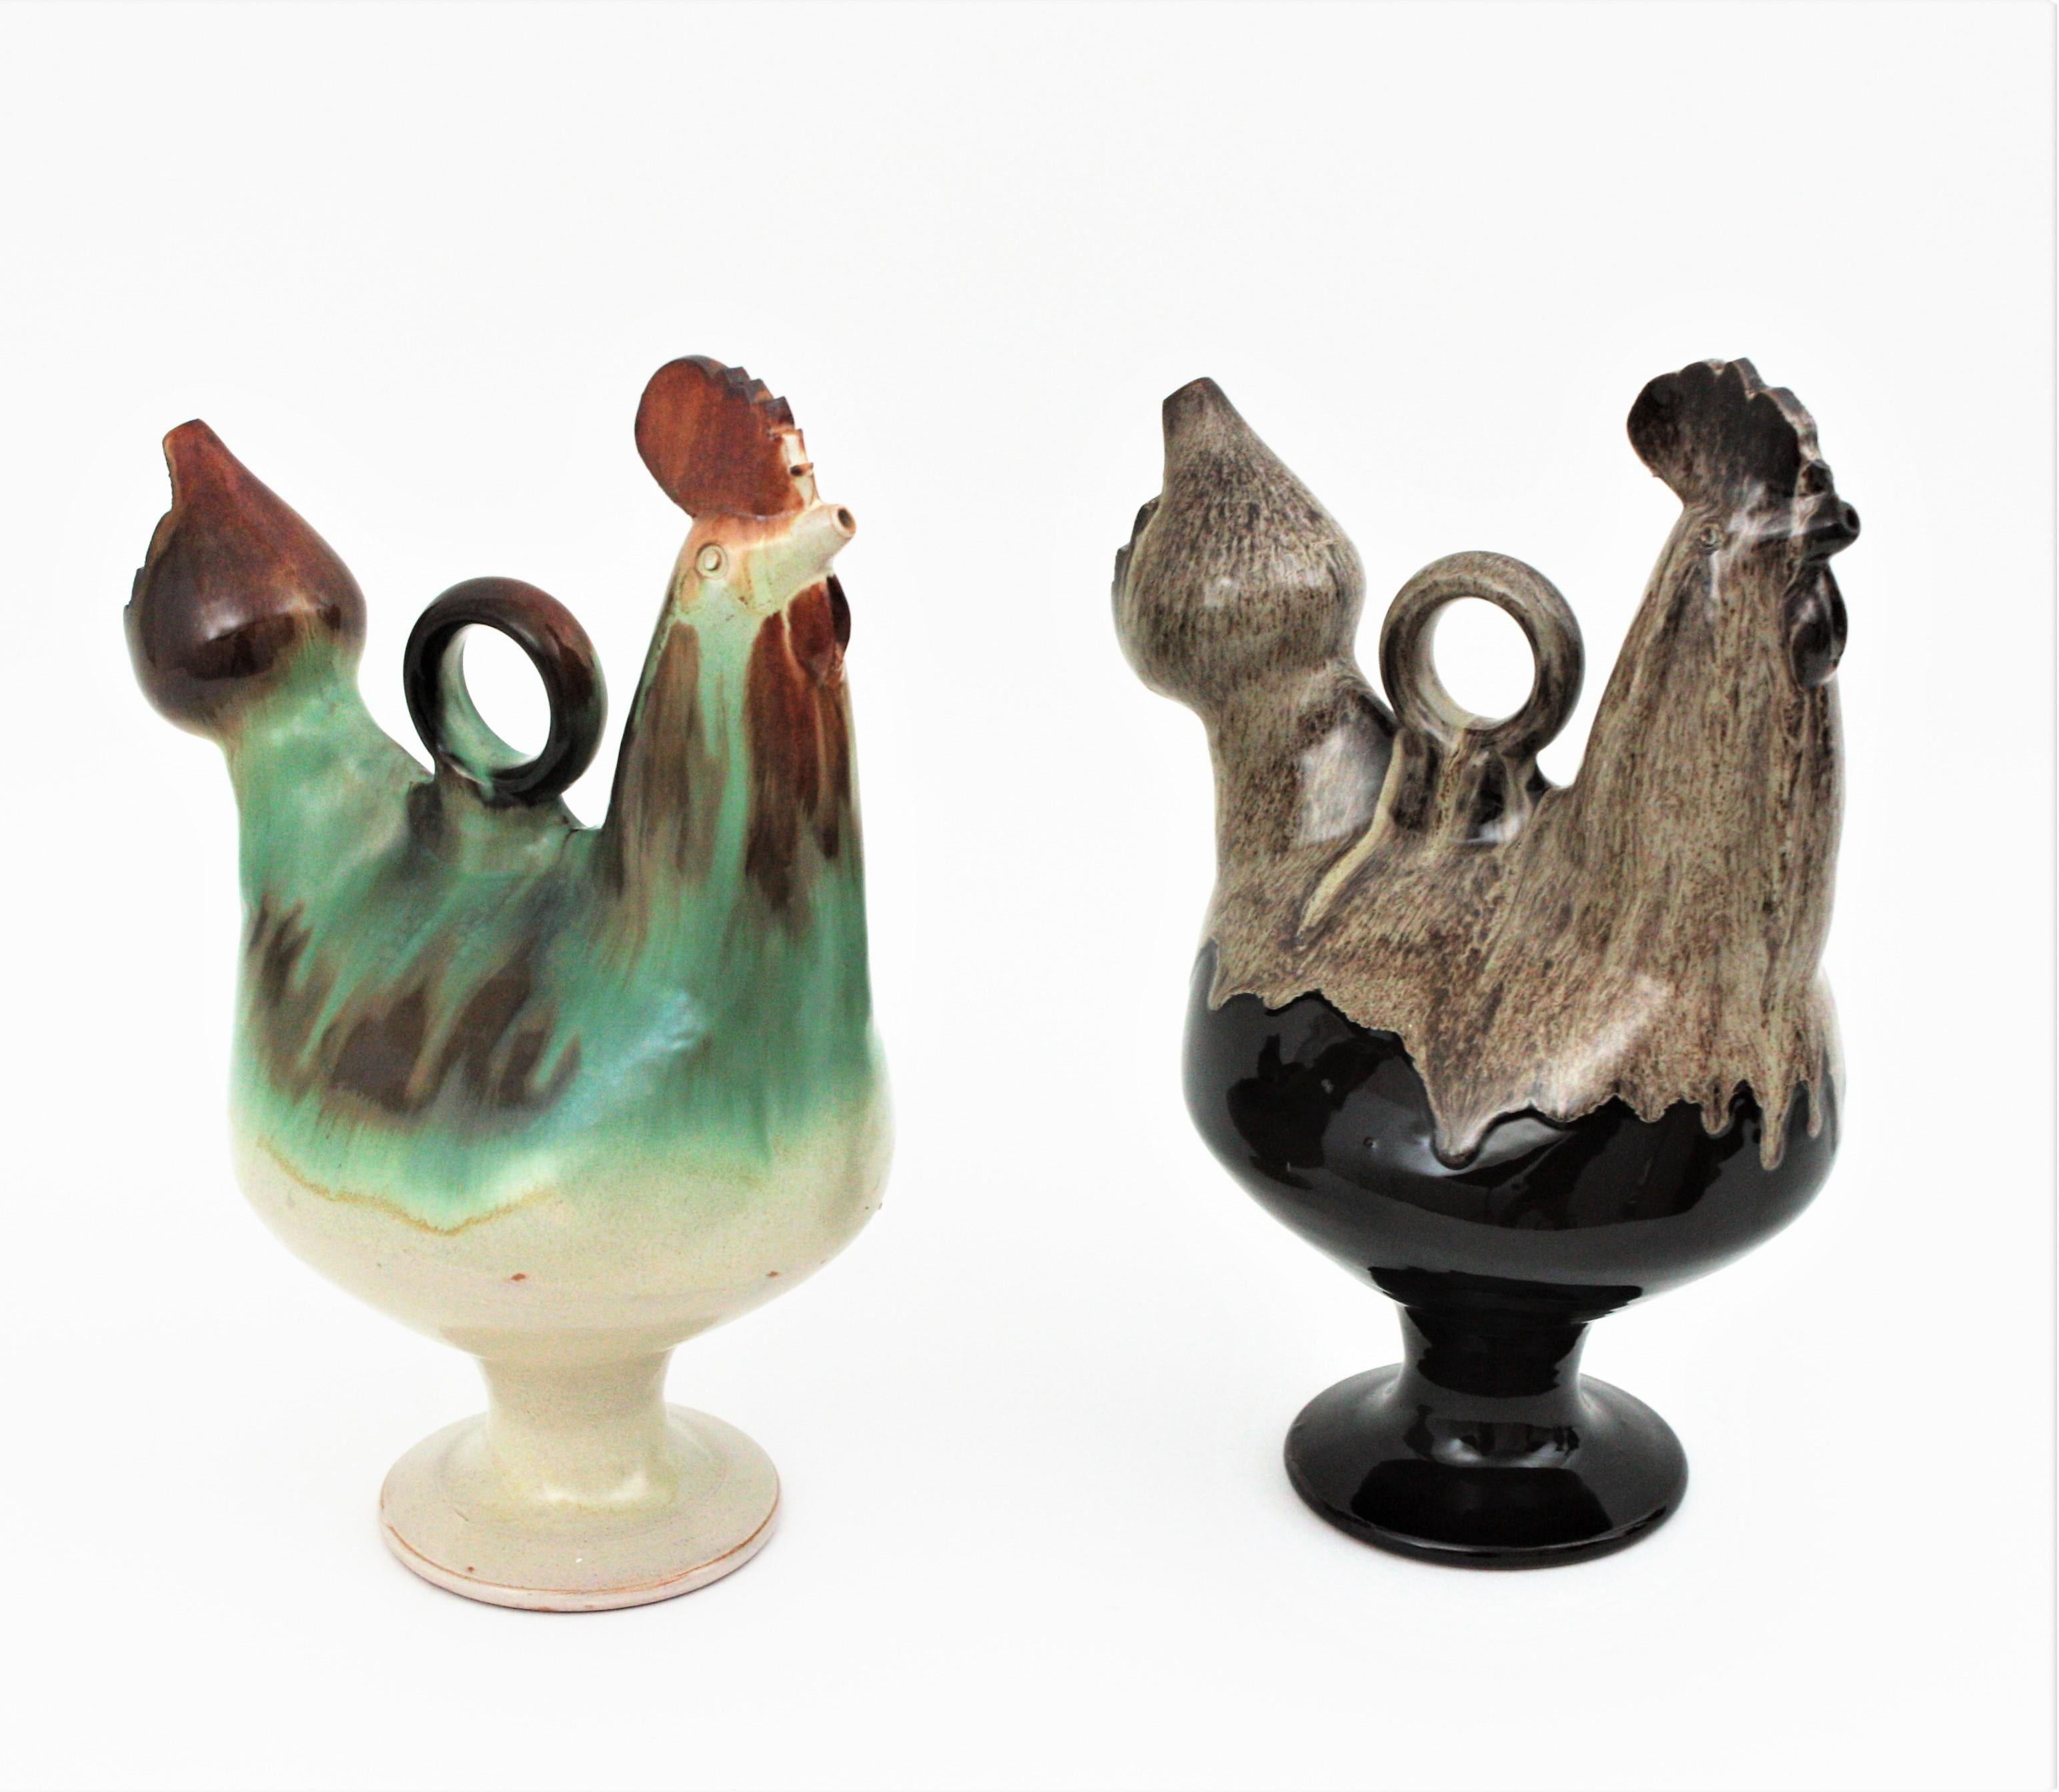 Spanish Unmatching Pair of Rooster Glazed Ceramic Pitchers, Spain, 1970s For Sale